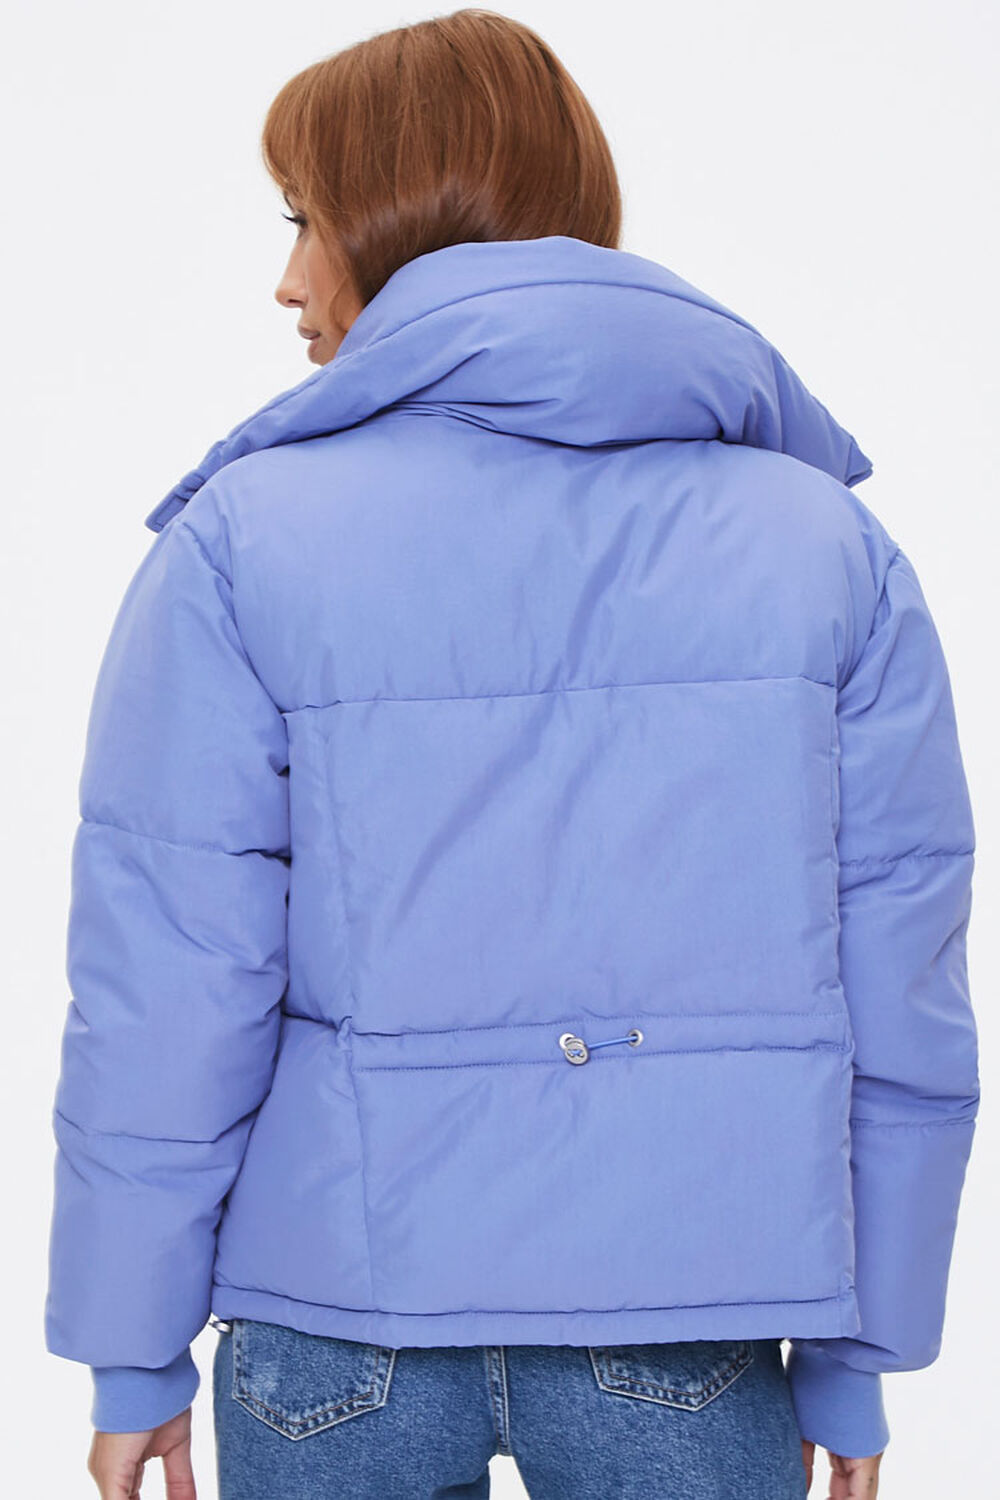 PERIWINKLE Pull-Ring Puffer Jacket, image 3